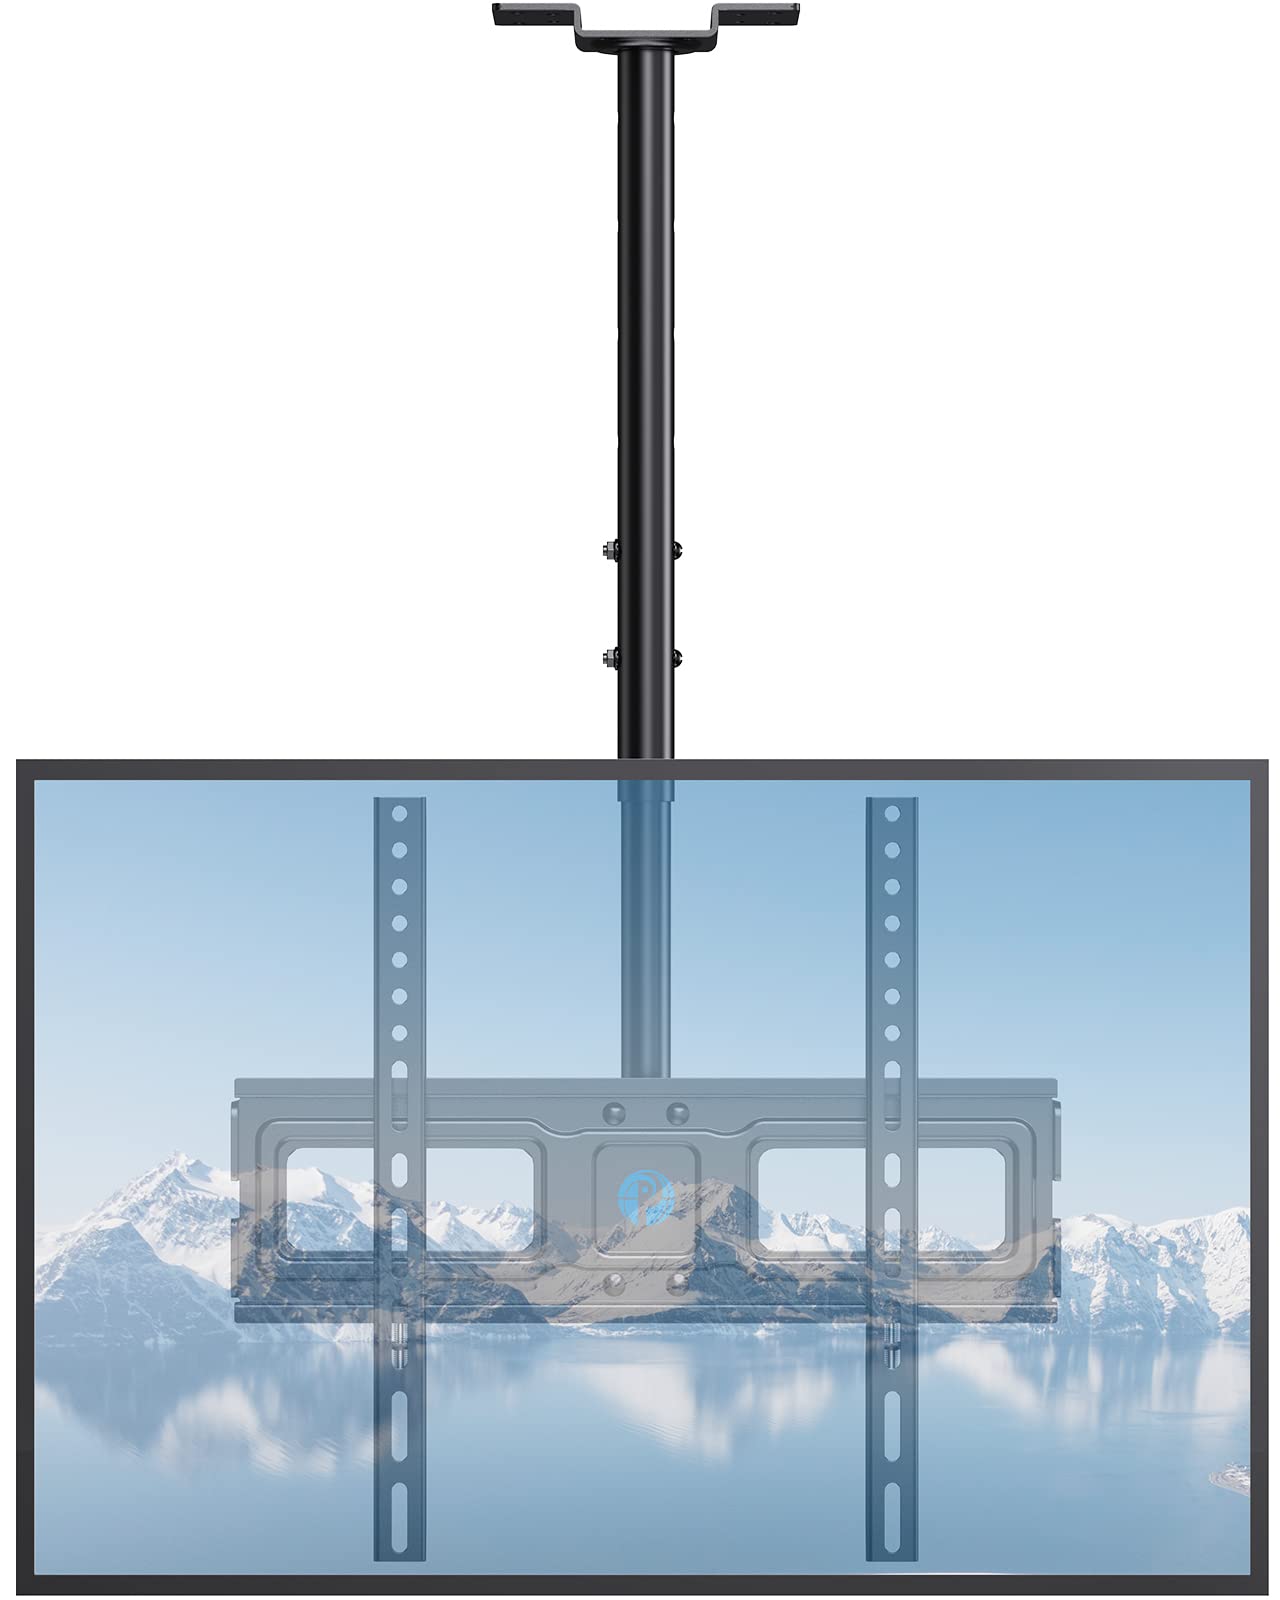 Pipishell Ceiling TV Mount for Most 26-55 Inch LCD LED OLED QLED 4K TVs, Hanging TV Monitor Ceiling Mount Bracket Height Adjustable Tilt Swivel Holds up to 60lbs Max VESA 400X400mm